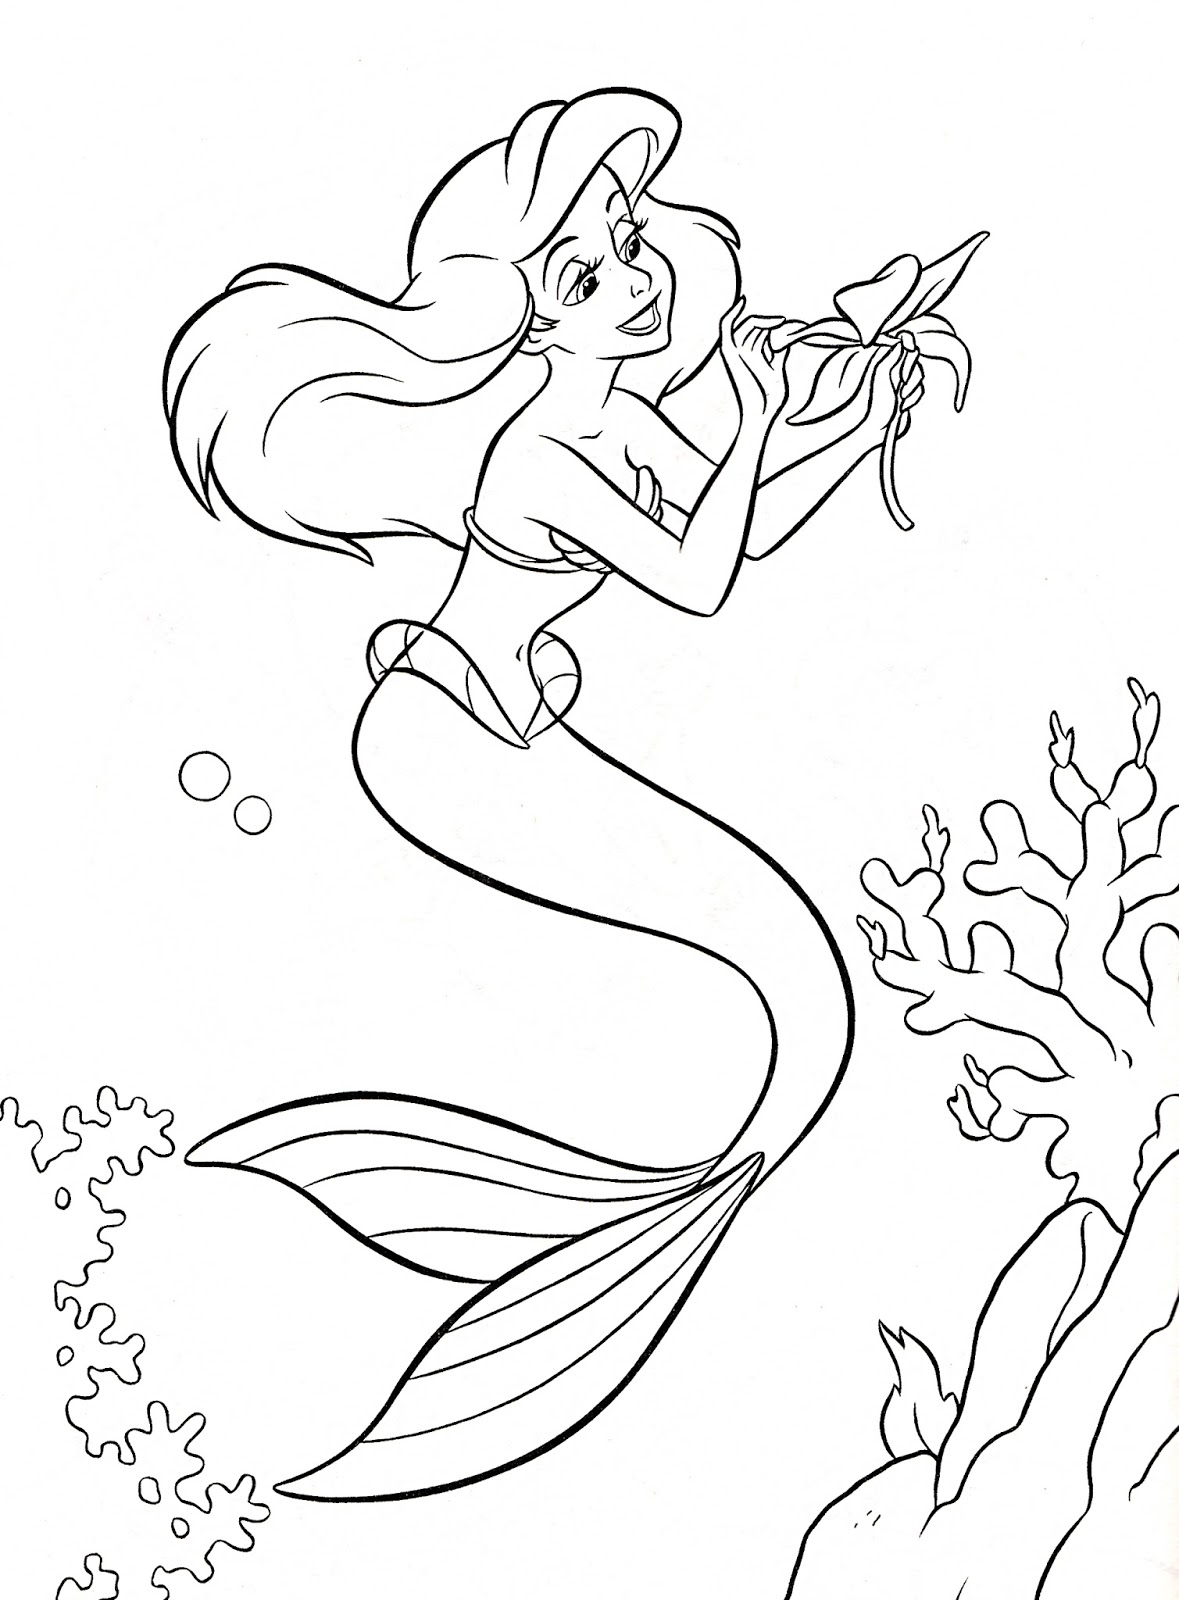 ariel the little mermaid colouring page